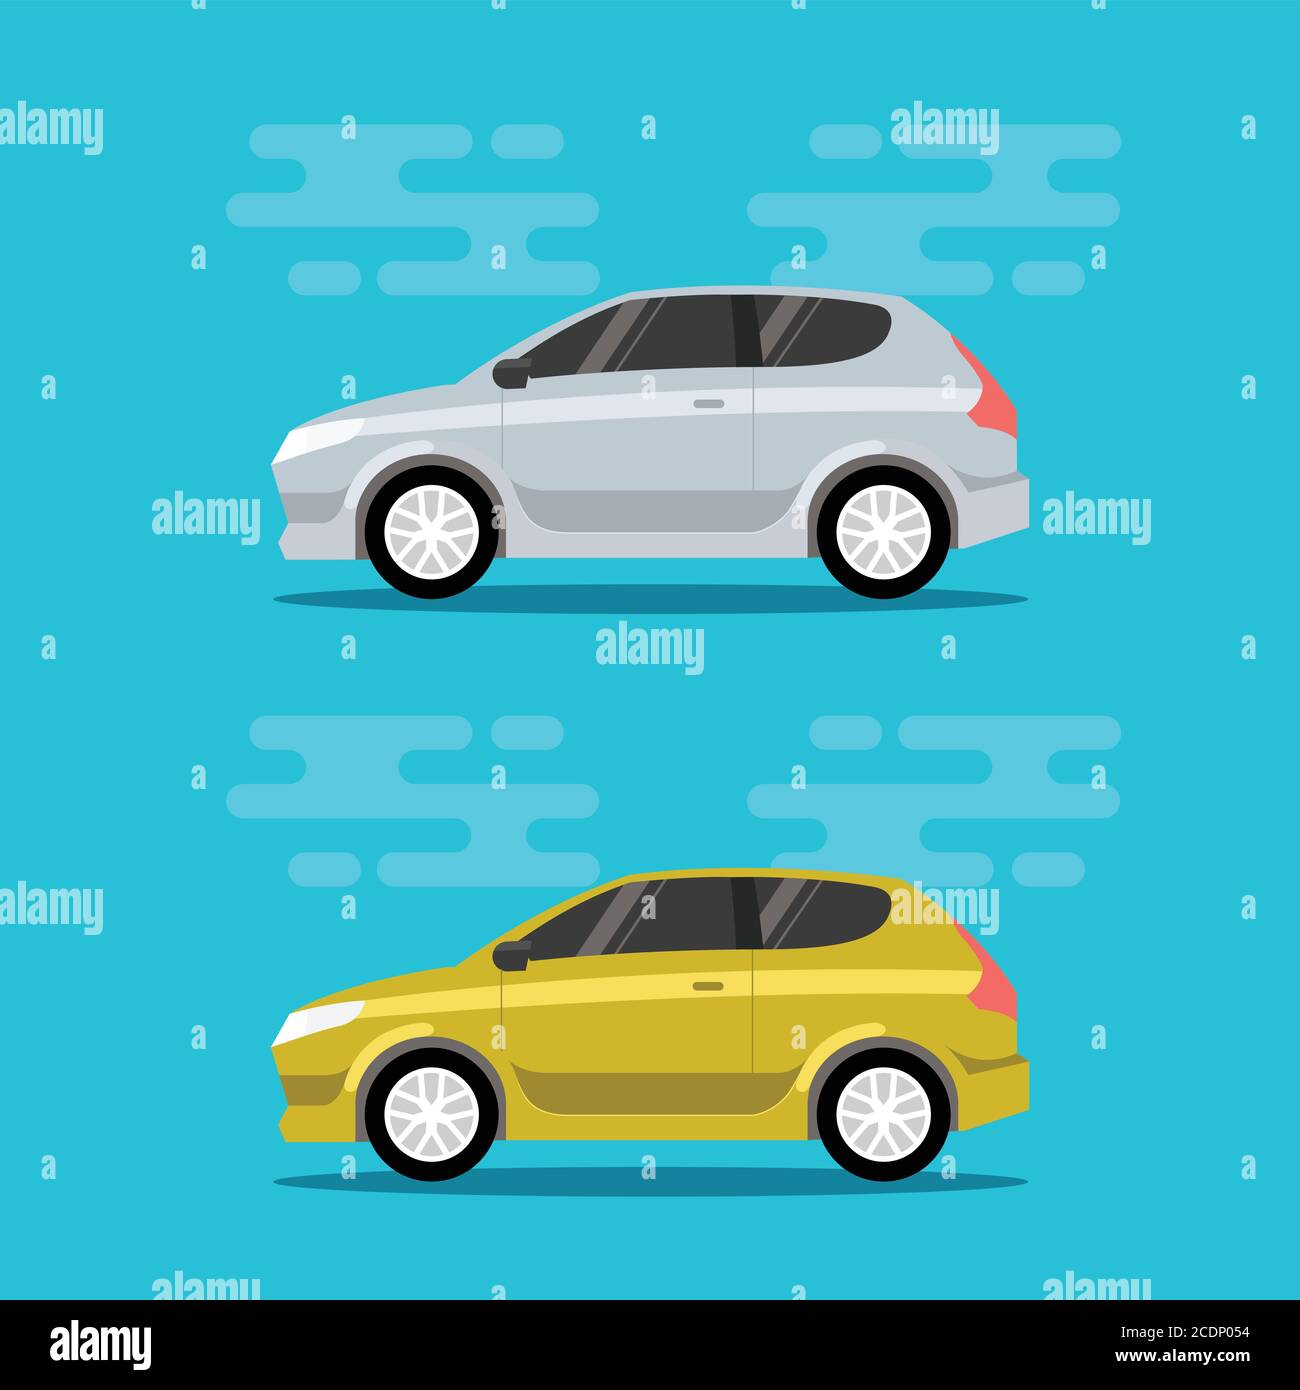 Hatchback cars in flat color style. City mini vehicle transportation icons. Vector illustrations. Stock Vector